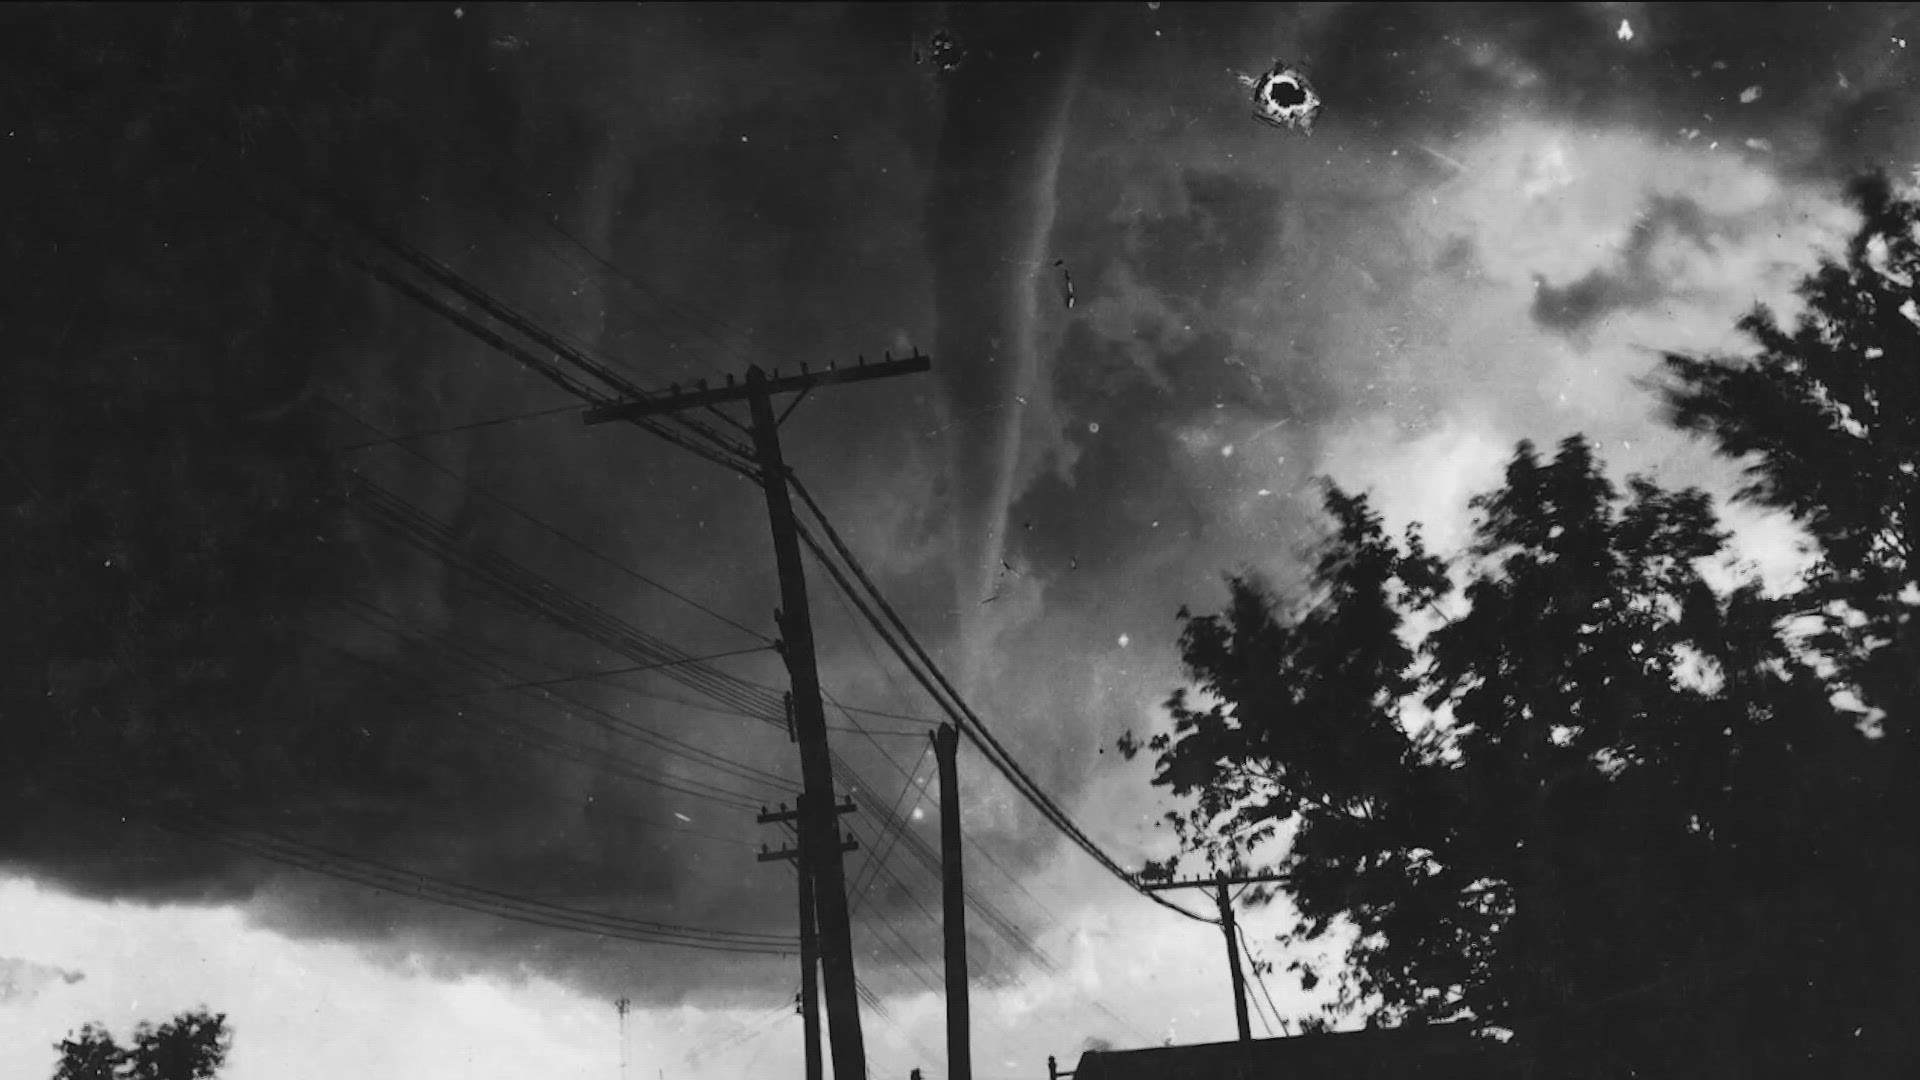 Way back in 1922, Austin was hit by not one, but two tornadoes – on the same day.